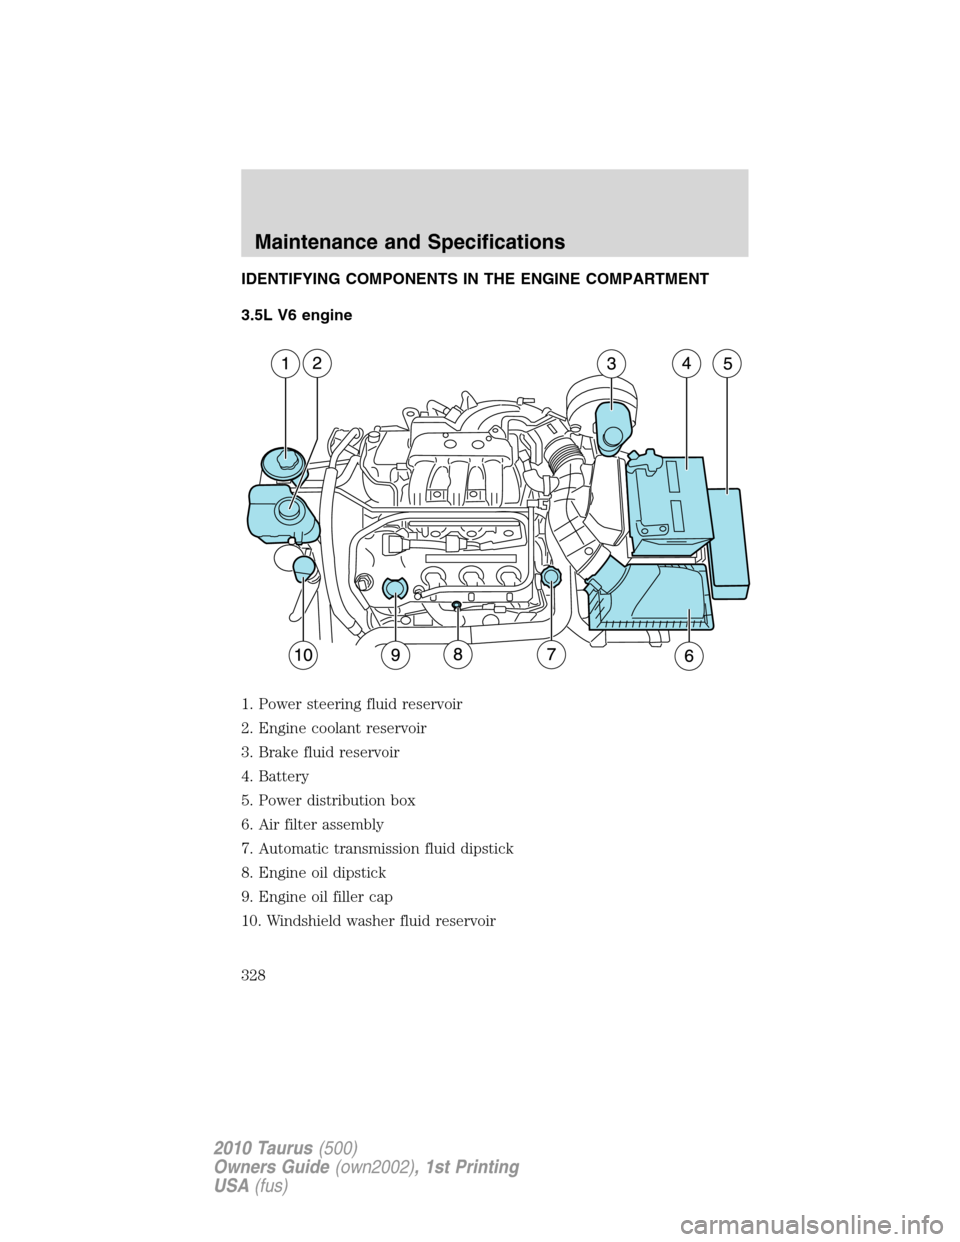 FORD TAURUS 2010 6.G Owners Manual IDENTIFYING COMPONENTS IN THE ENGINE COMPARTMENT
3.5L V6 engine
1. Power steering fluid reservoir
2. Engine coolant reservoir
3. Brake fluid reservoir
4. Battery
5. Power distribution box
6. Air filte